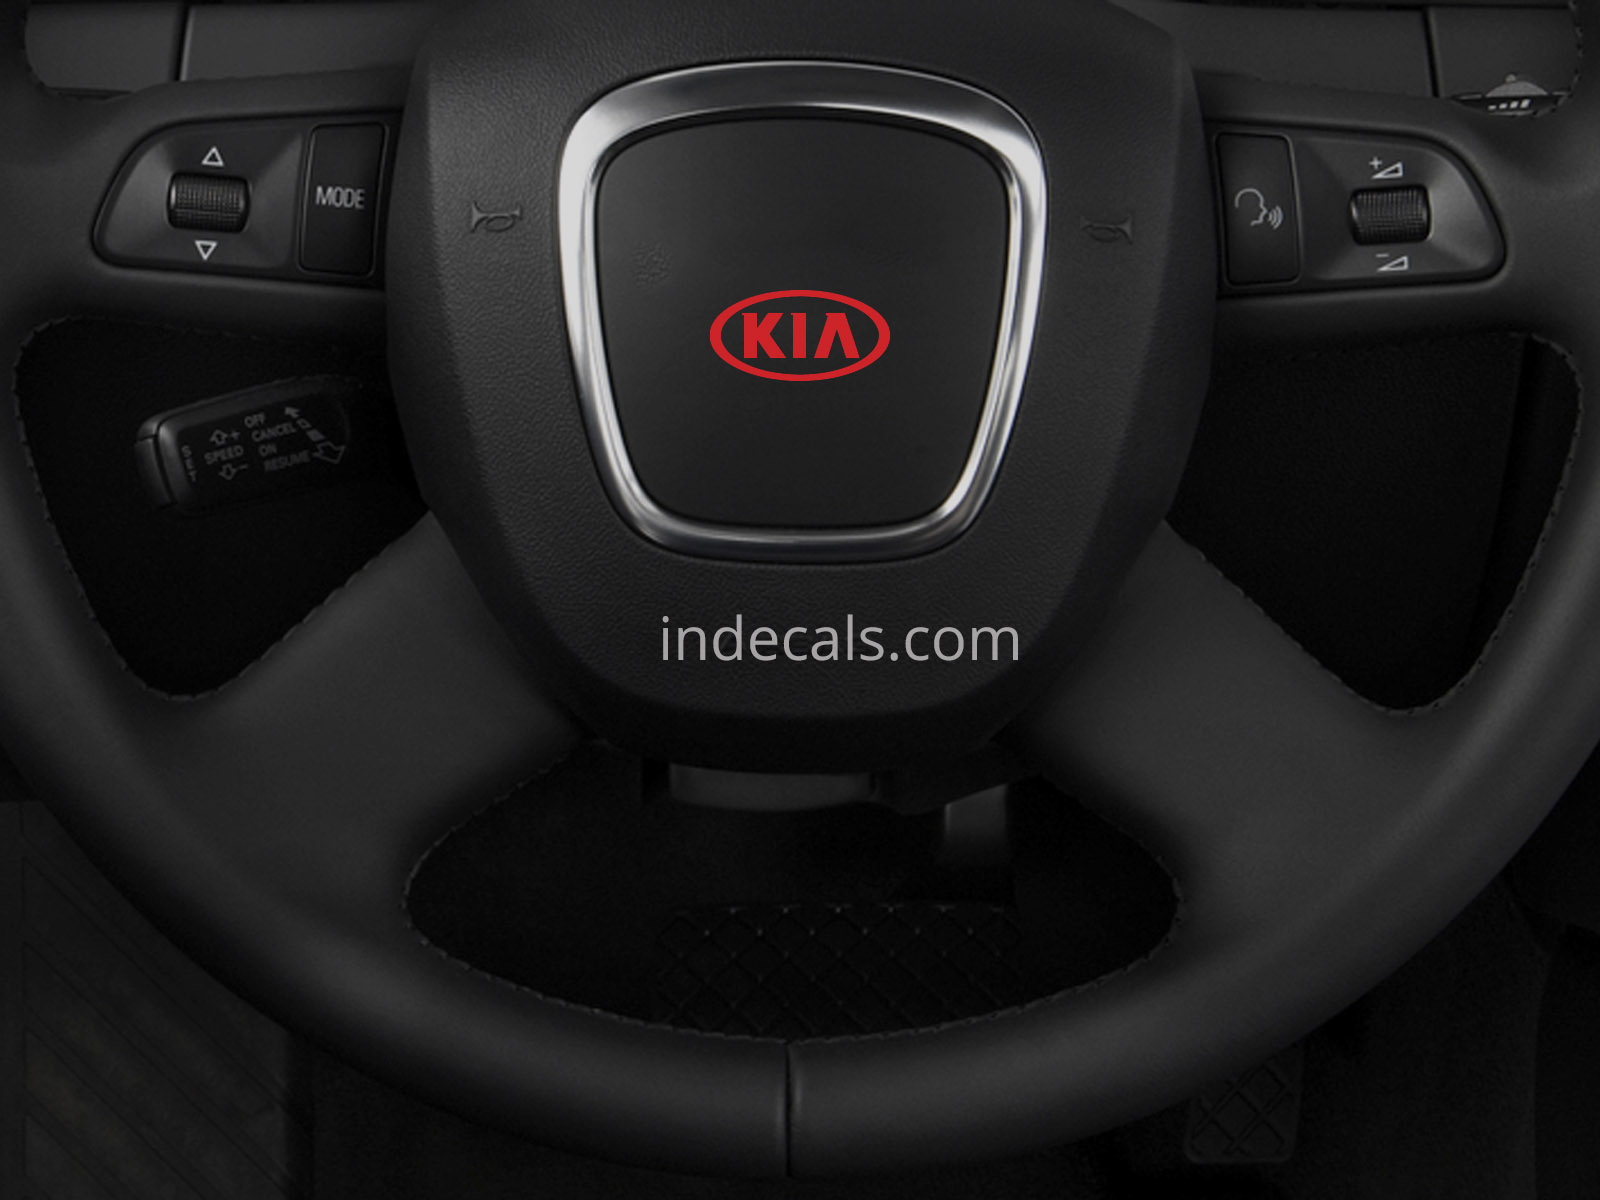 3 x KIA Stickers for Steering Wheel - Red